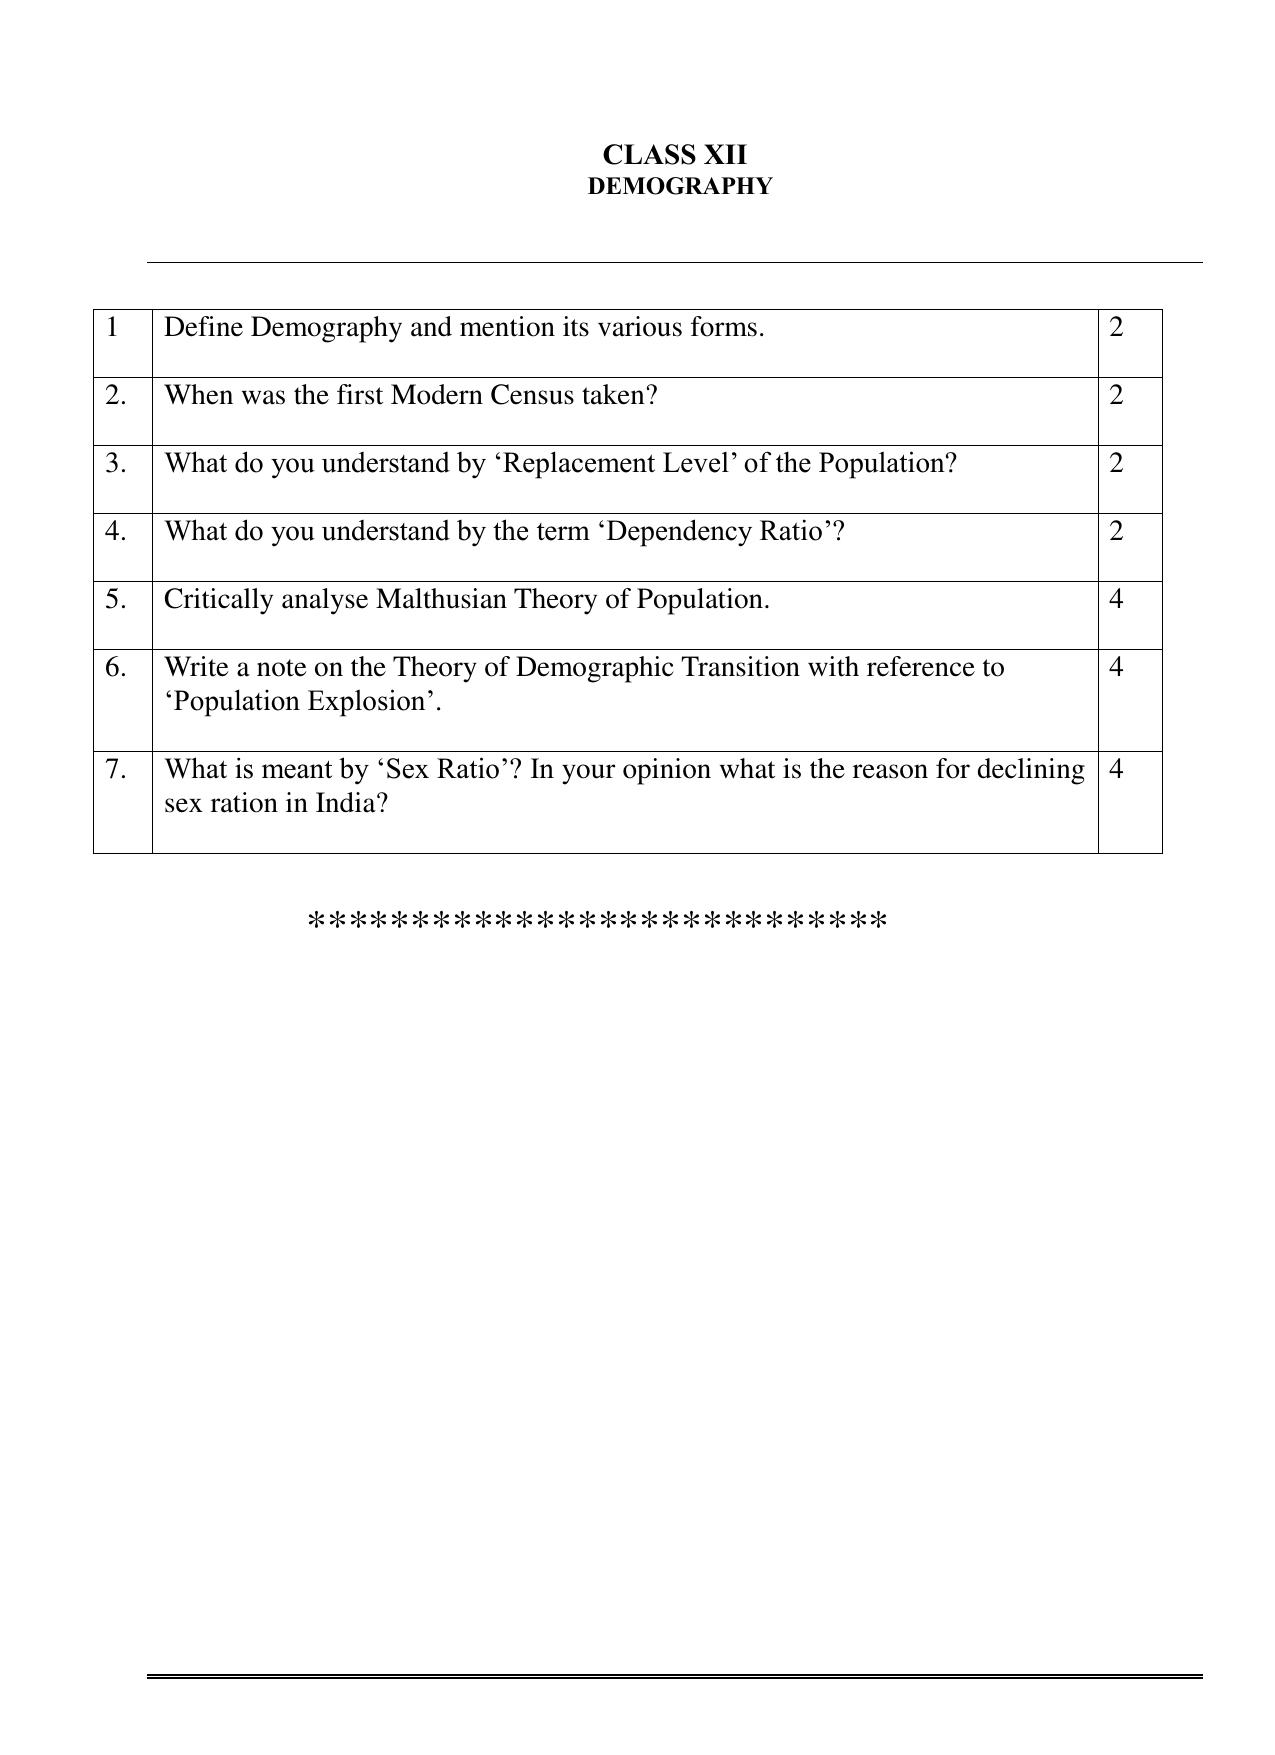 CBSE Class 12 Sociology Demography Worksheets - Page 1